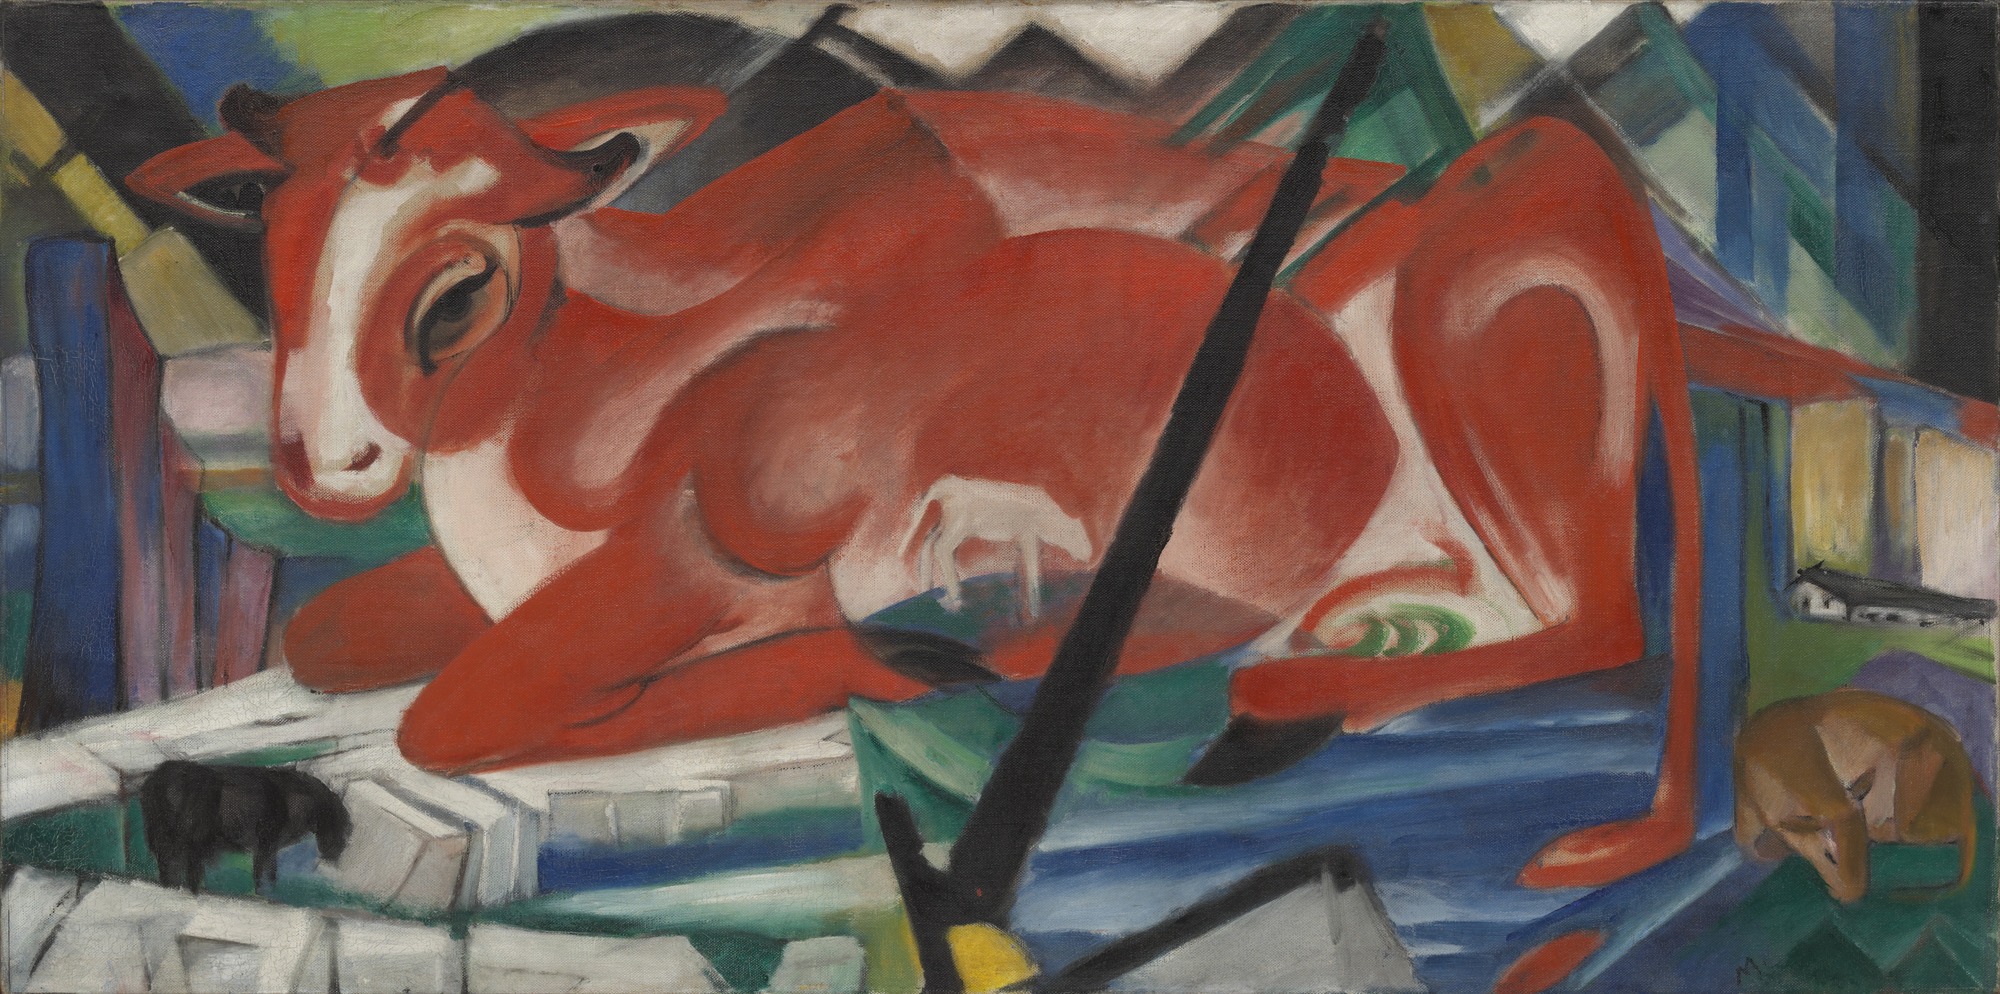 Franz Marc, The World Cow, 1913, oil on canvas, 70.7 x 141.3 cm, (MoMA)